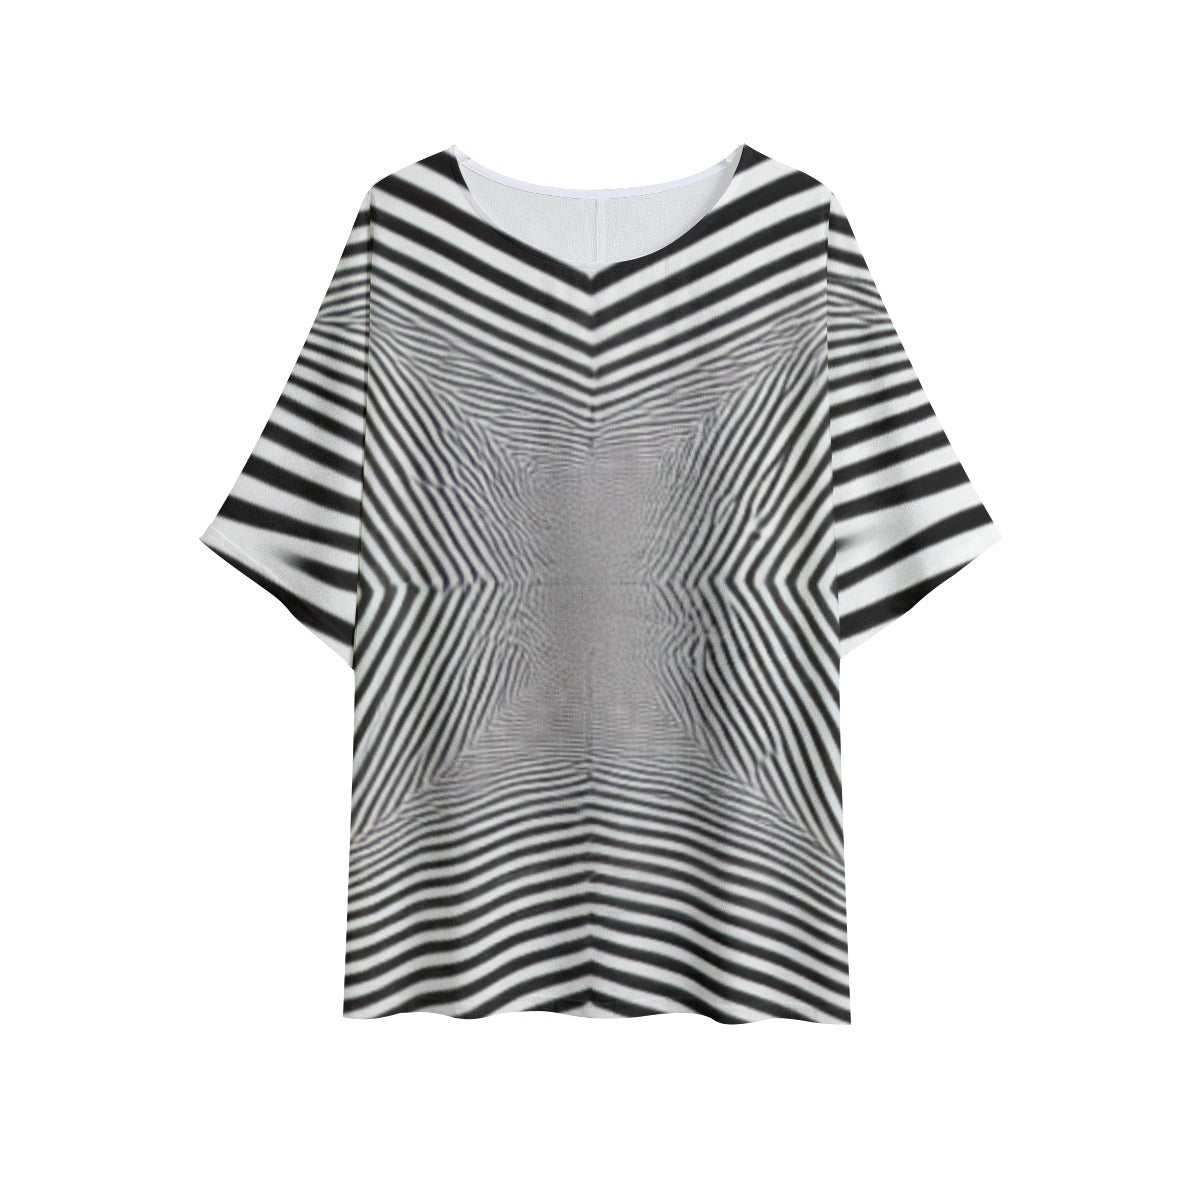 Black and White Illusion T-shirt with Bat Sleeve